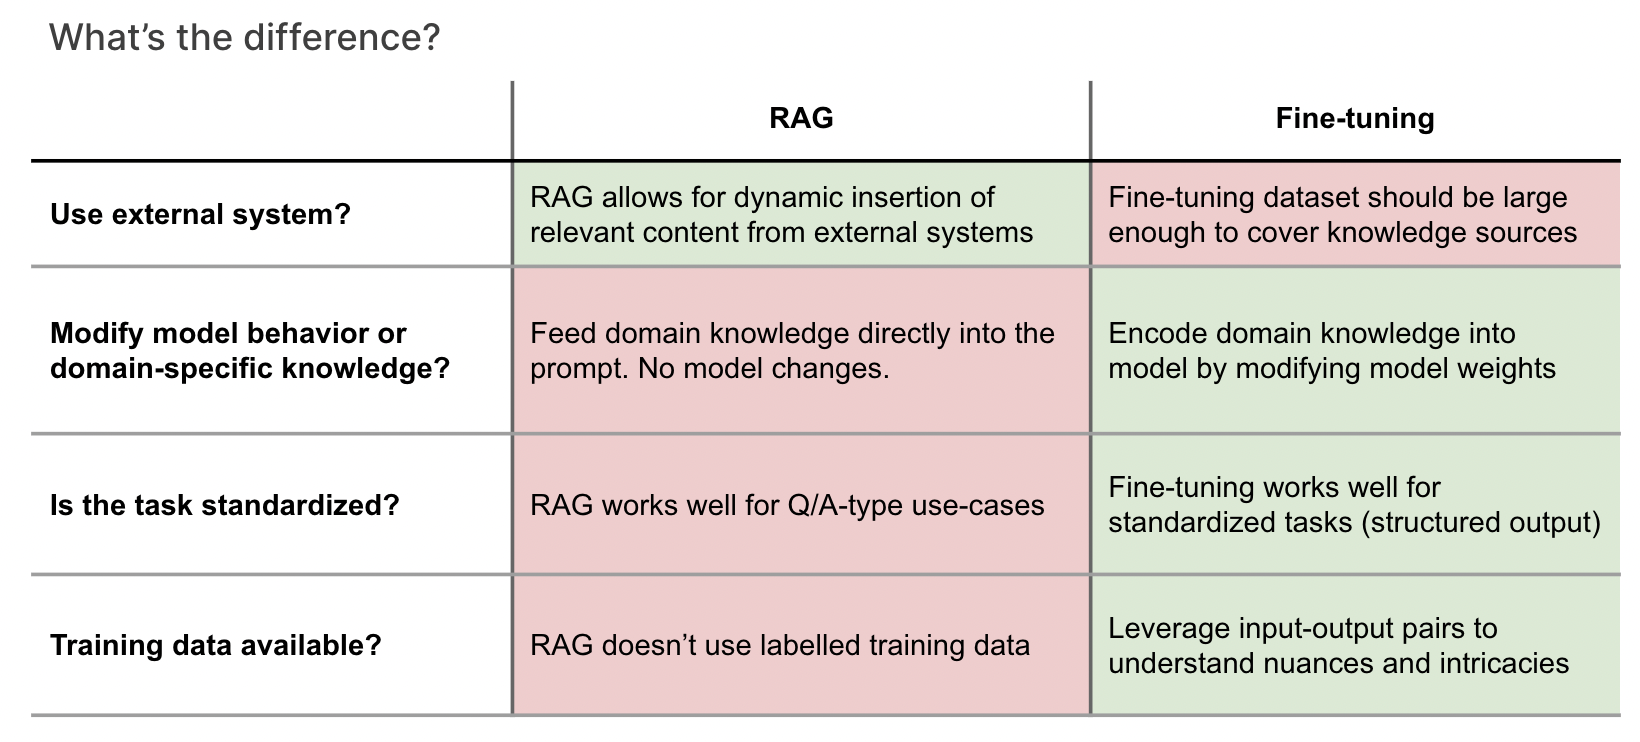 Comparing RAG and Fine-tuning: When to choose the right technique for your task.